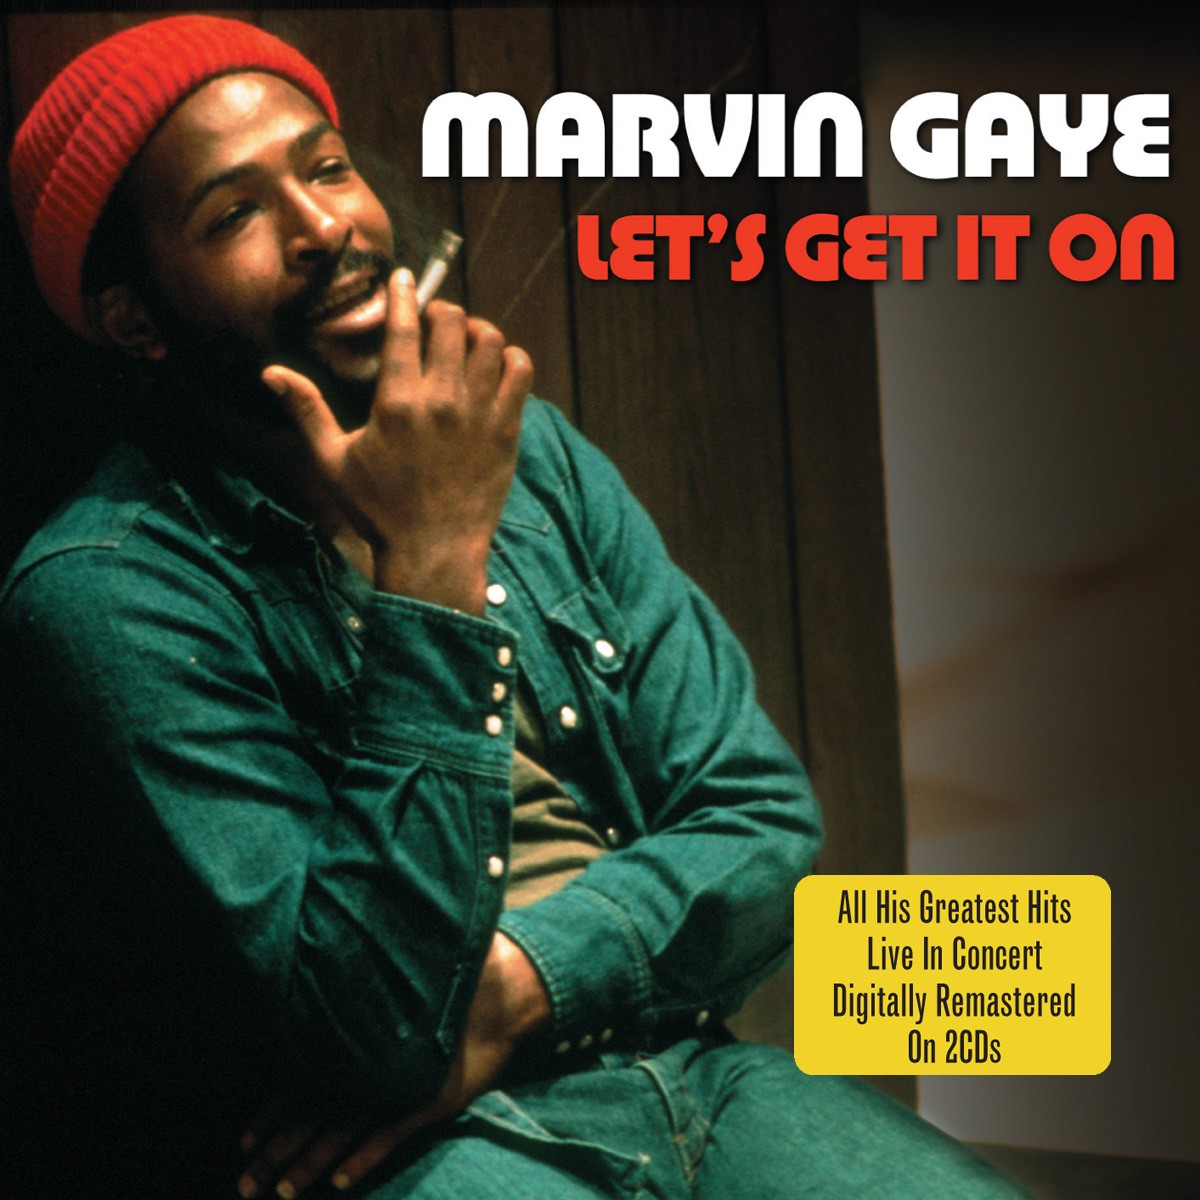 marvin-gaye-lets-get-it-on-his-greatest-hits-in-concert-2cd.jpg